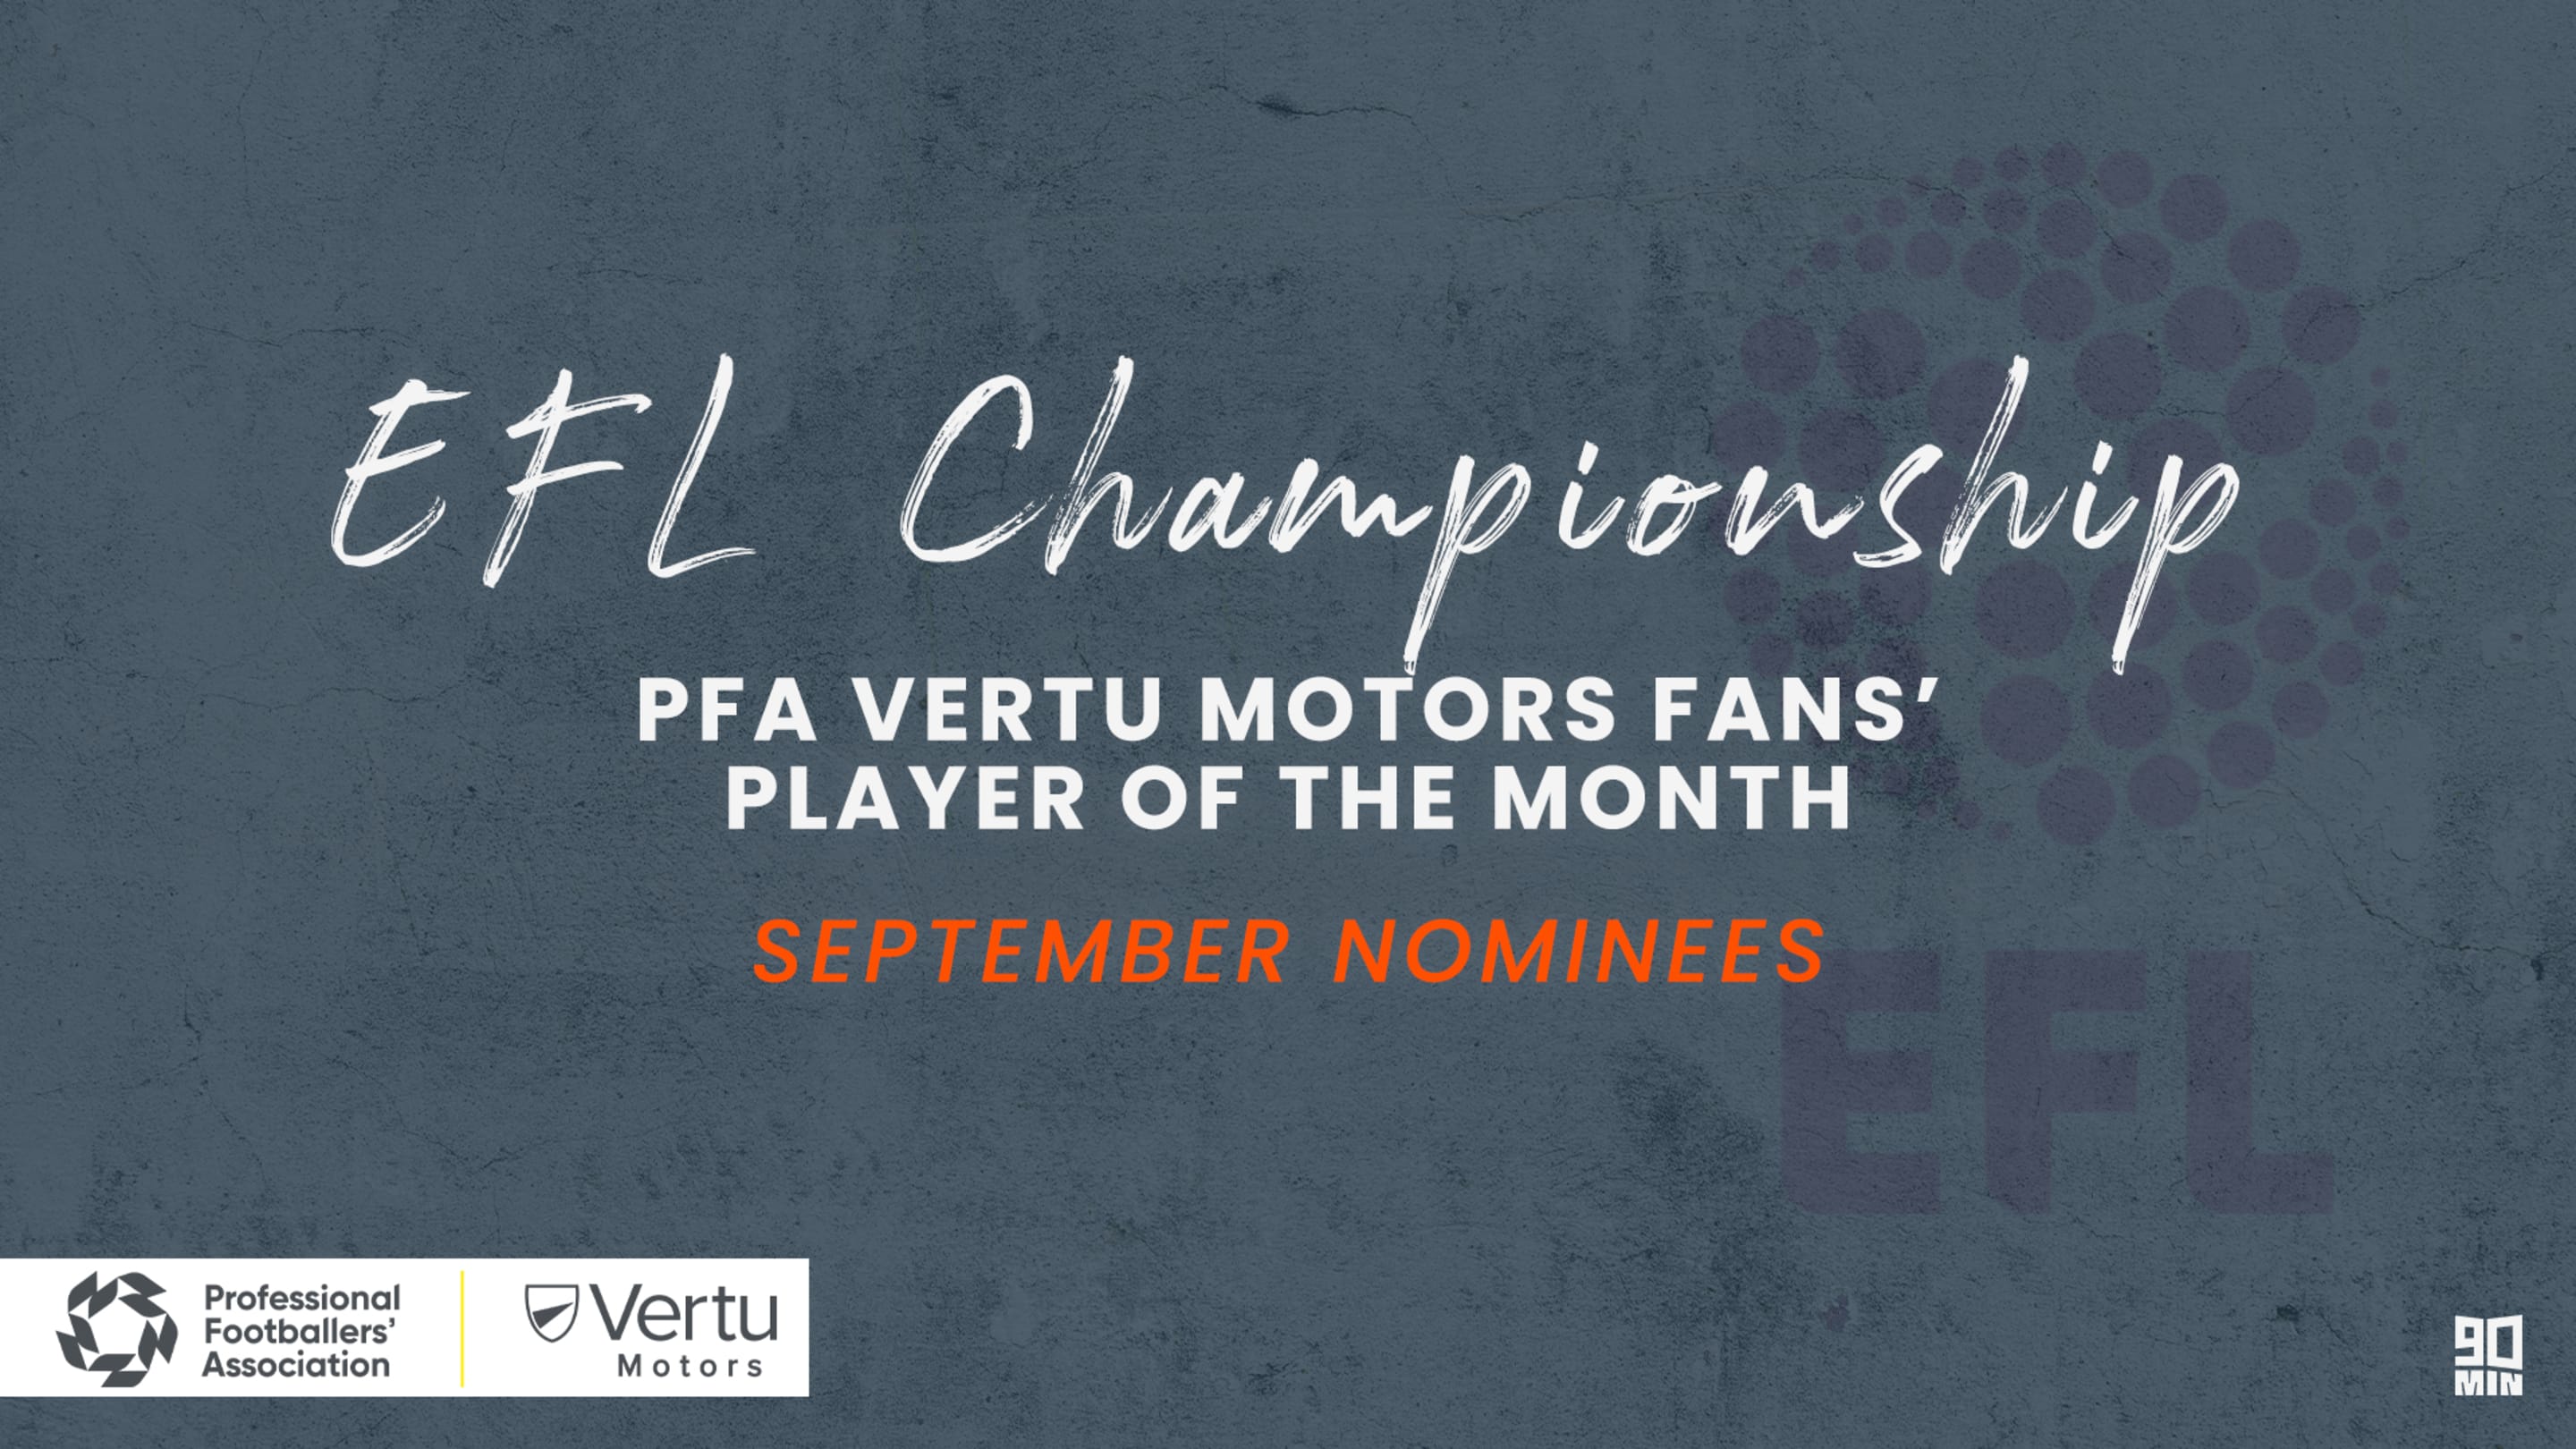 PFA Vertu Motors Championship Fans' Player of the Month - September nominees